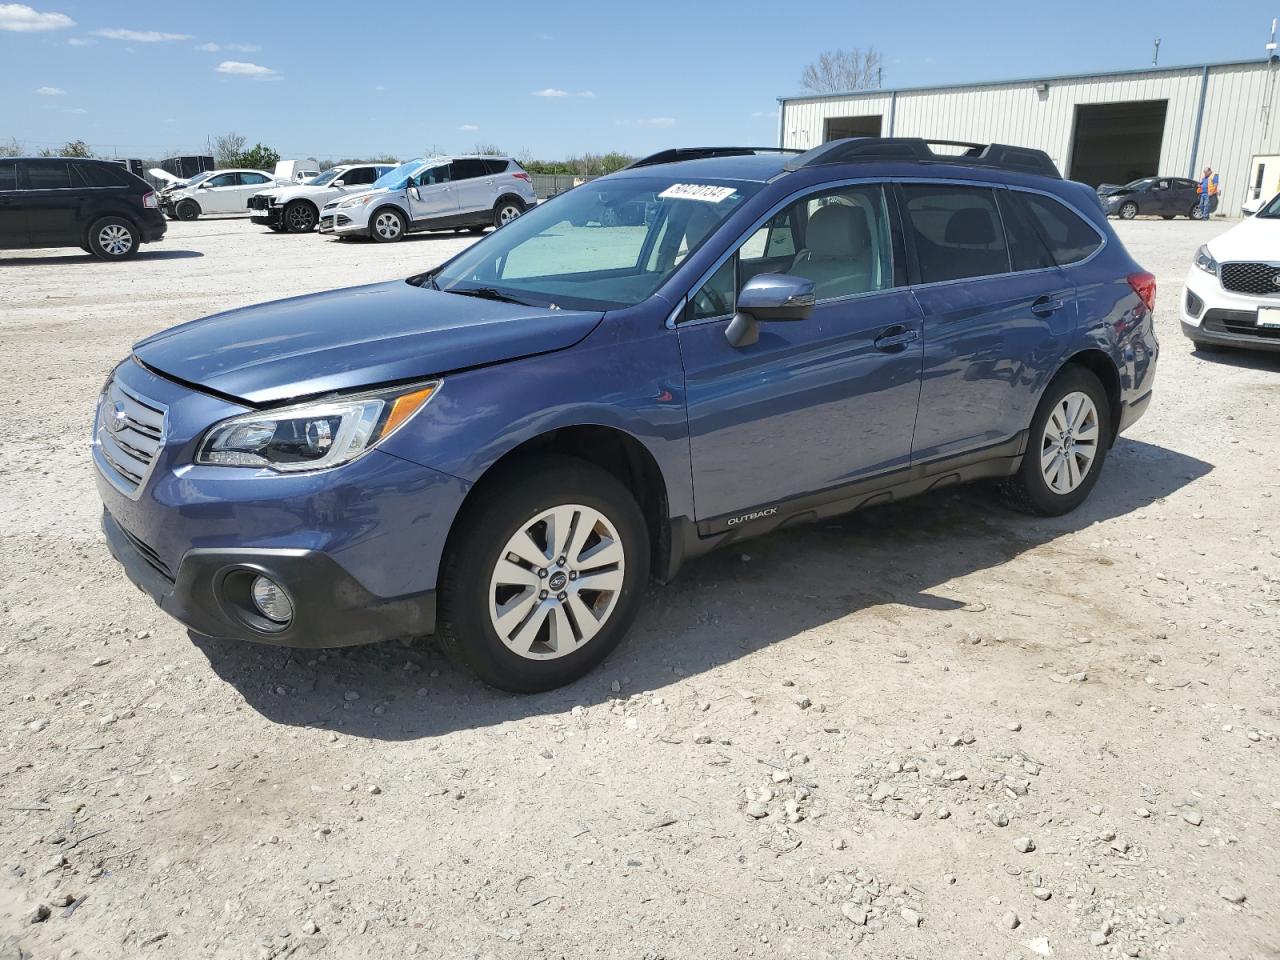 VIN: 4S4BSBHC0G3342713 - subaru outback